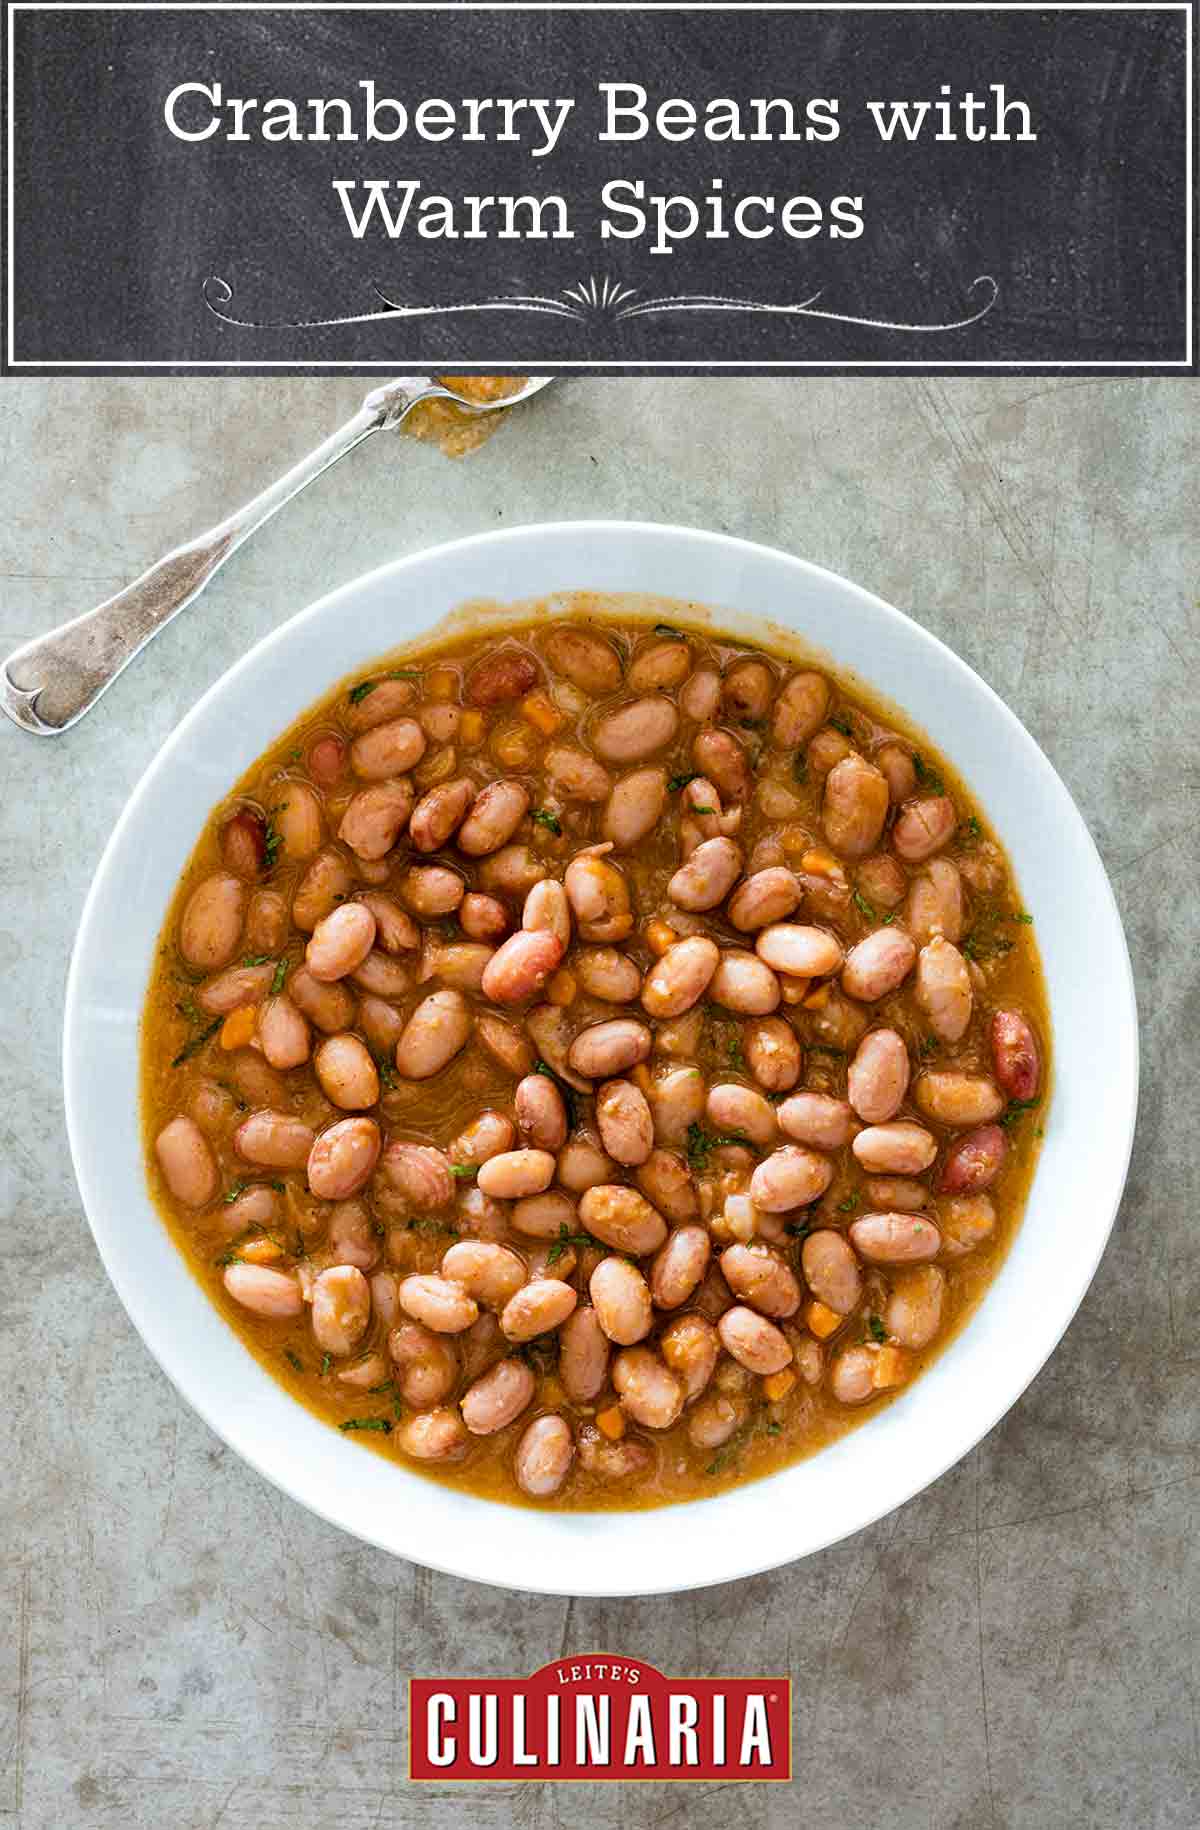 A white bowl filled with cranberry beans with warm spices; a spoon along side